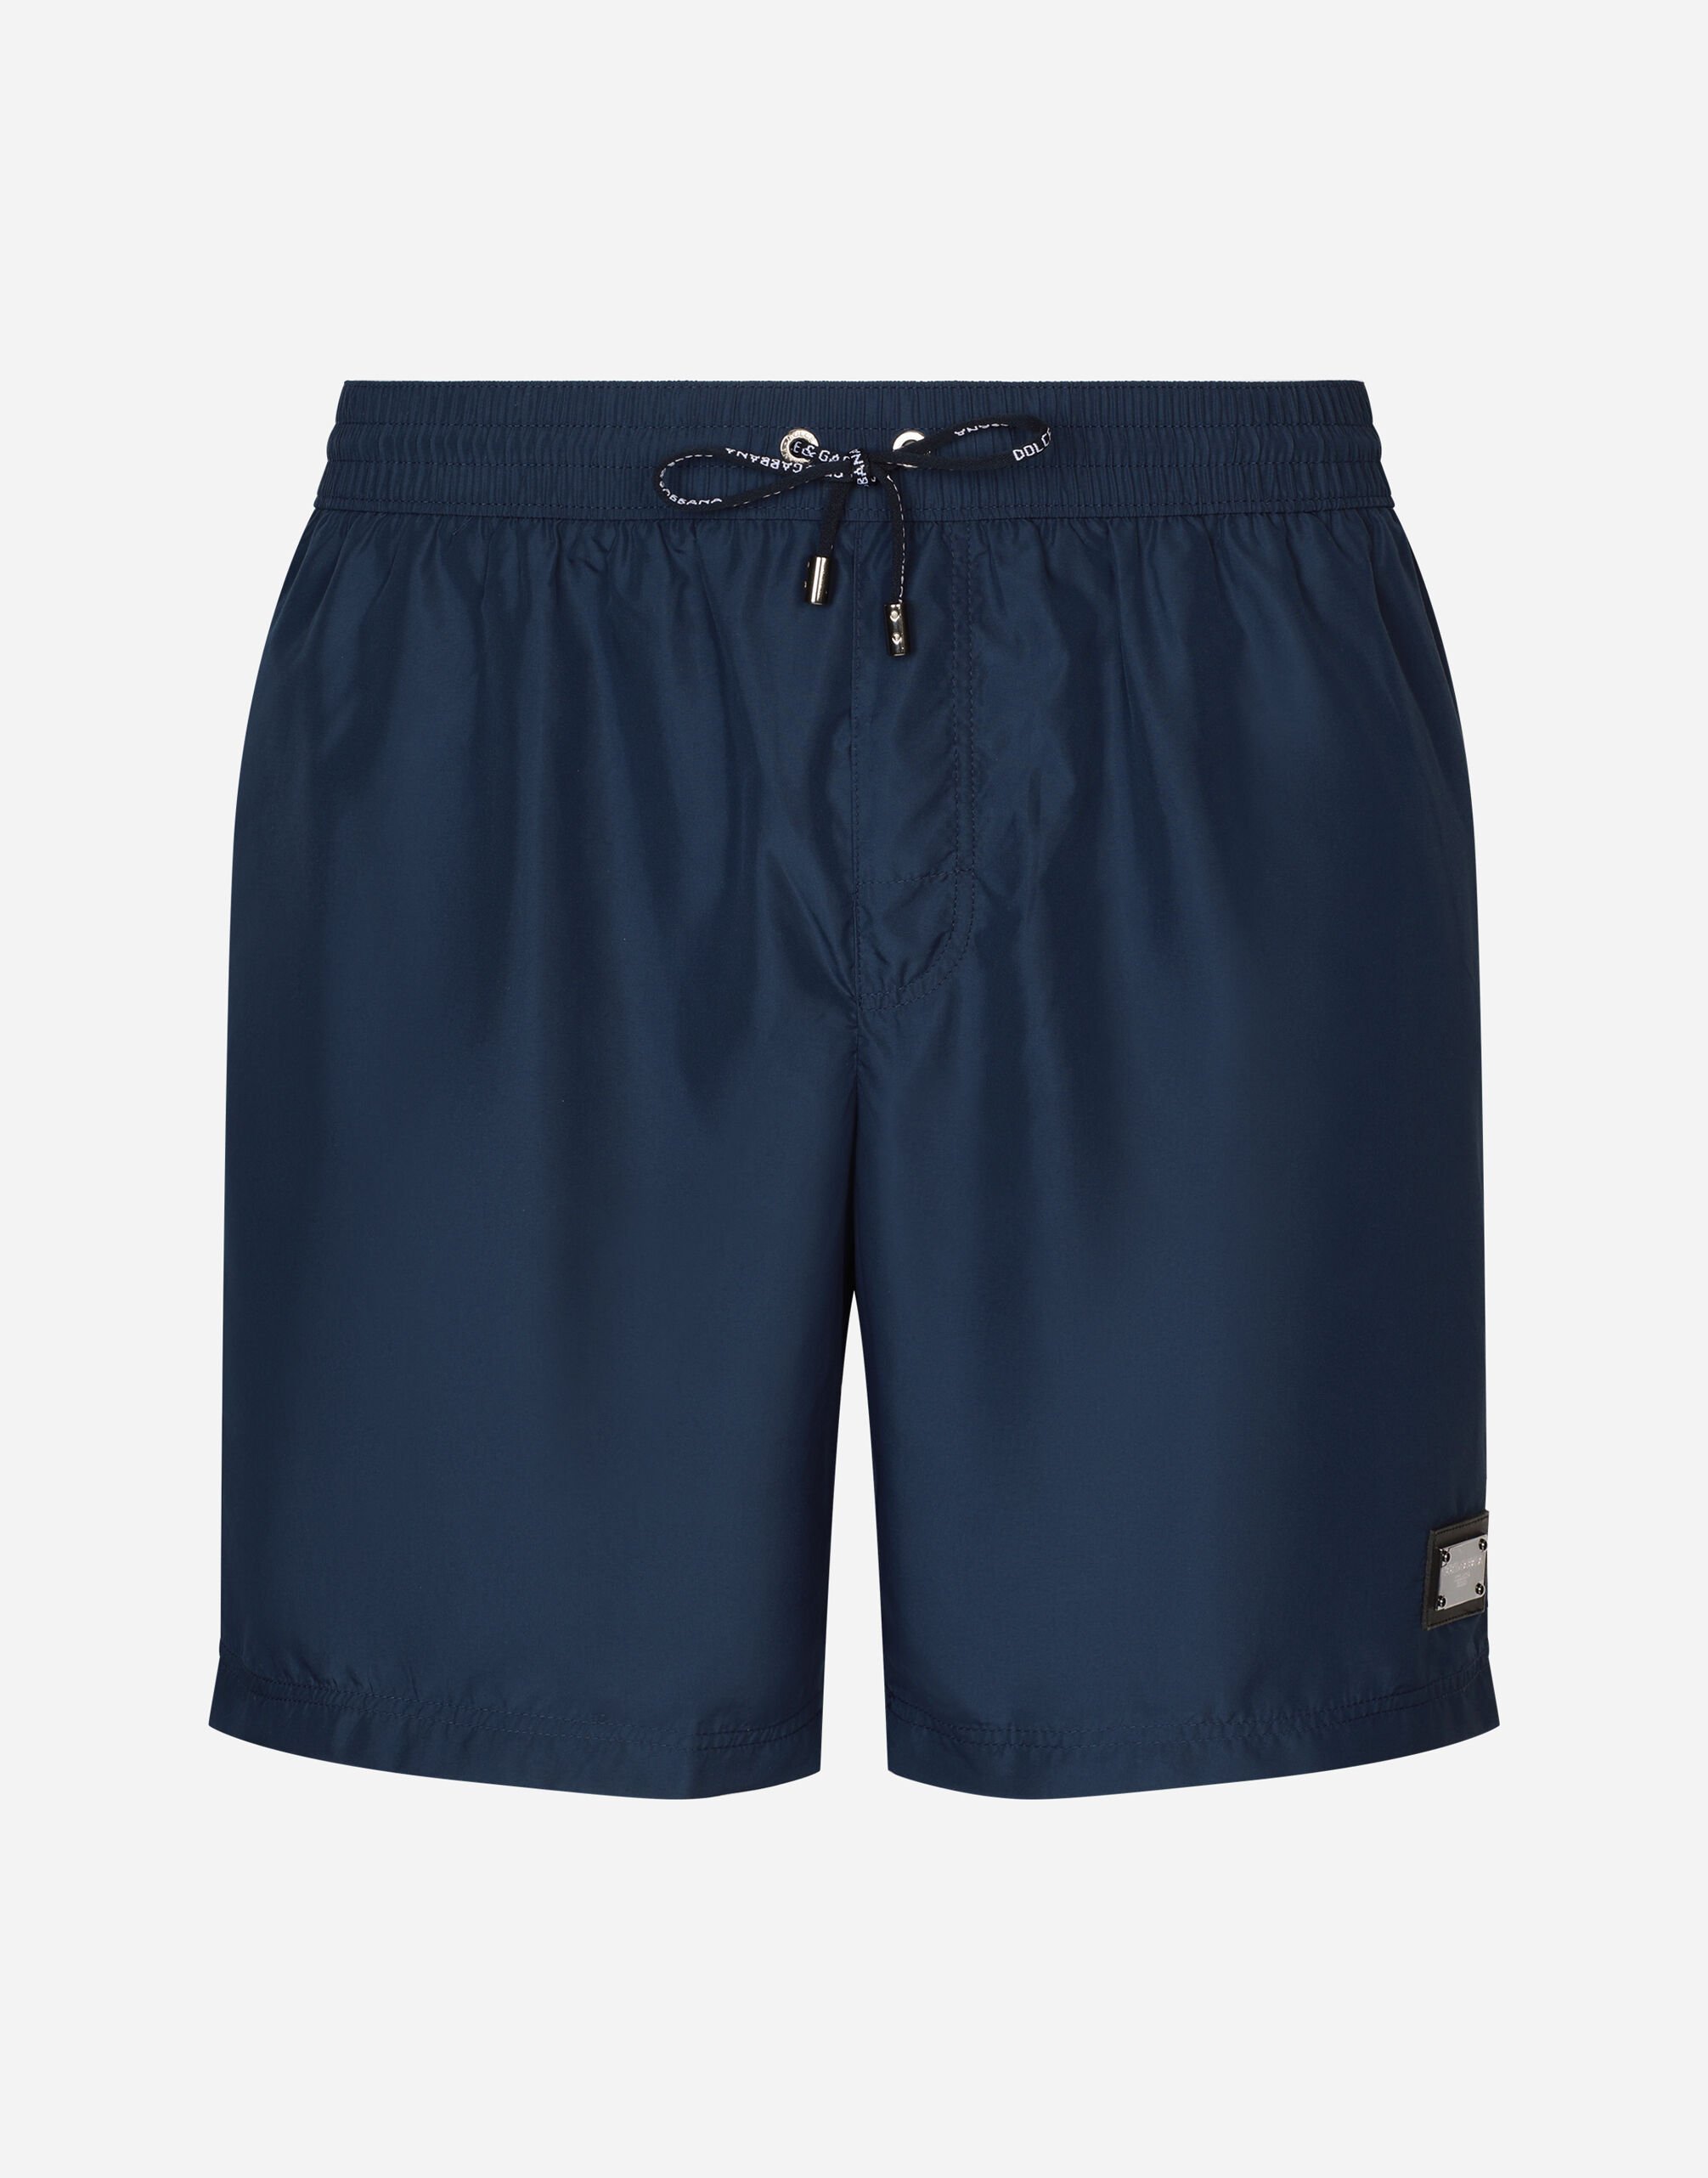 ${brand} Long-leg swim trunks with branded tag ${colorDescription} ${masterID}